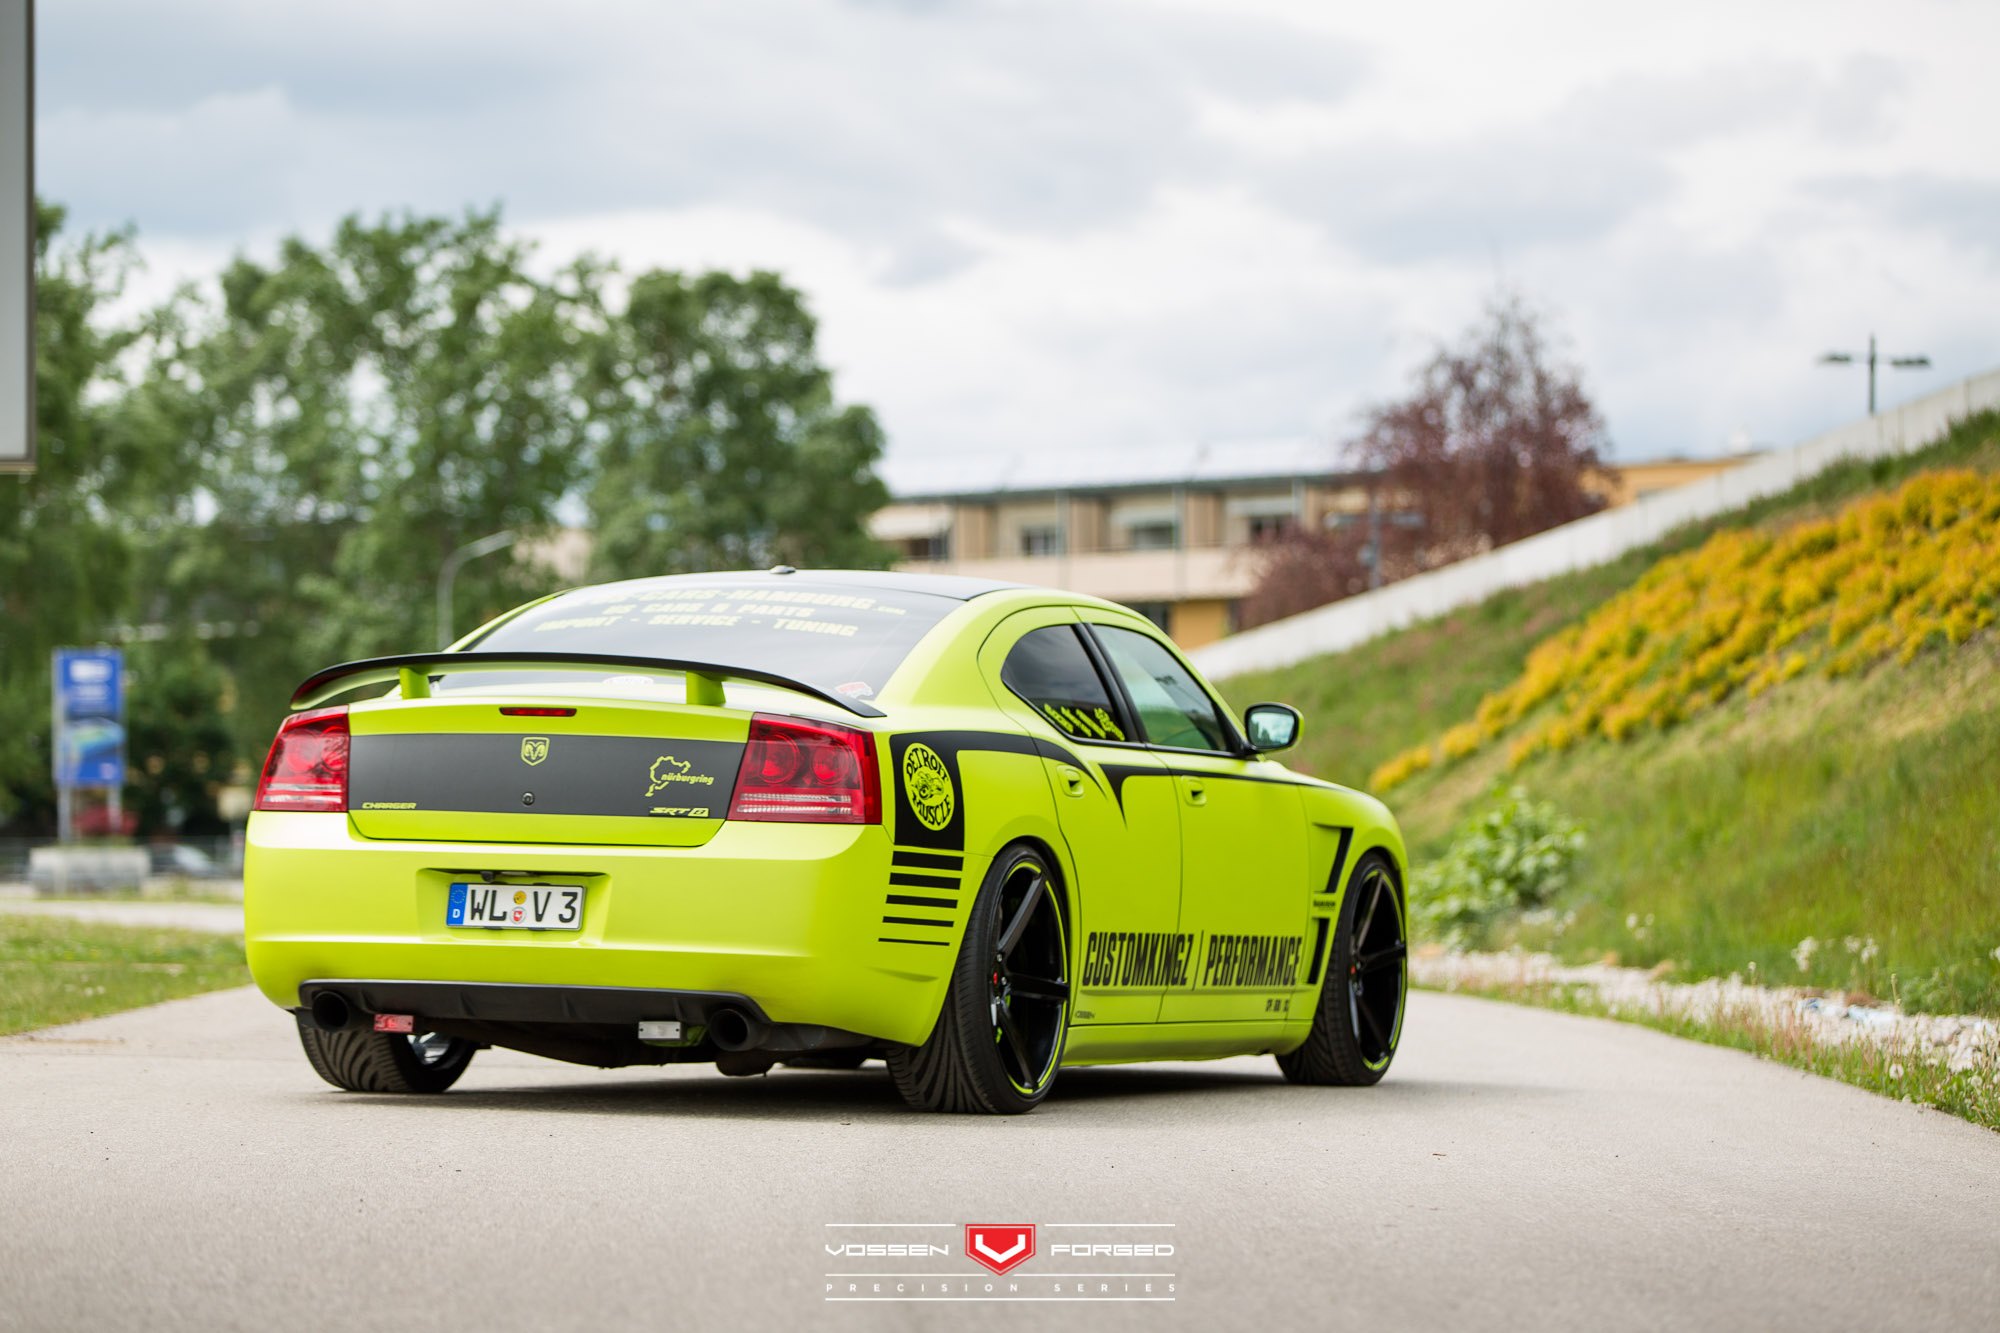 Aftermarket Wing Spoiler on Dodge Charger - Photo by Vossen